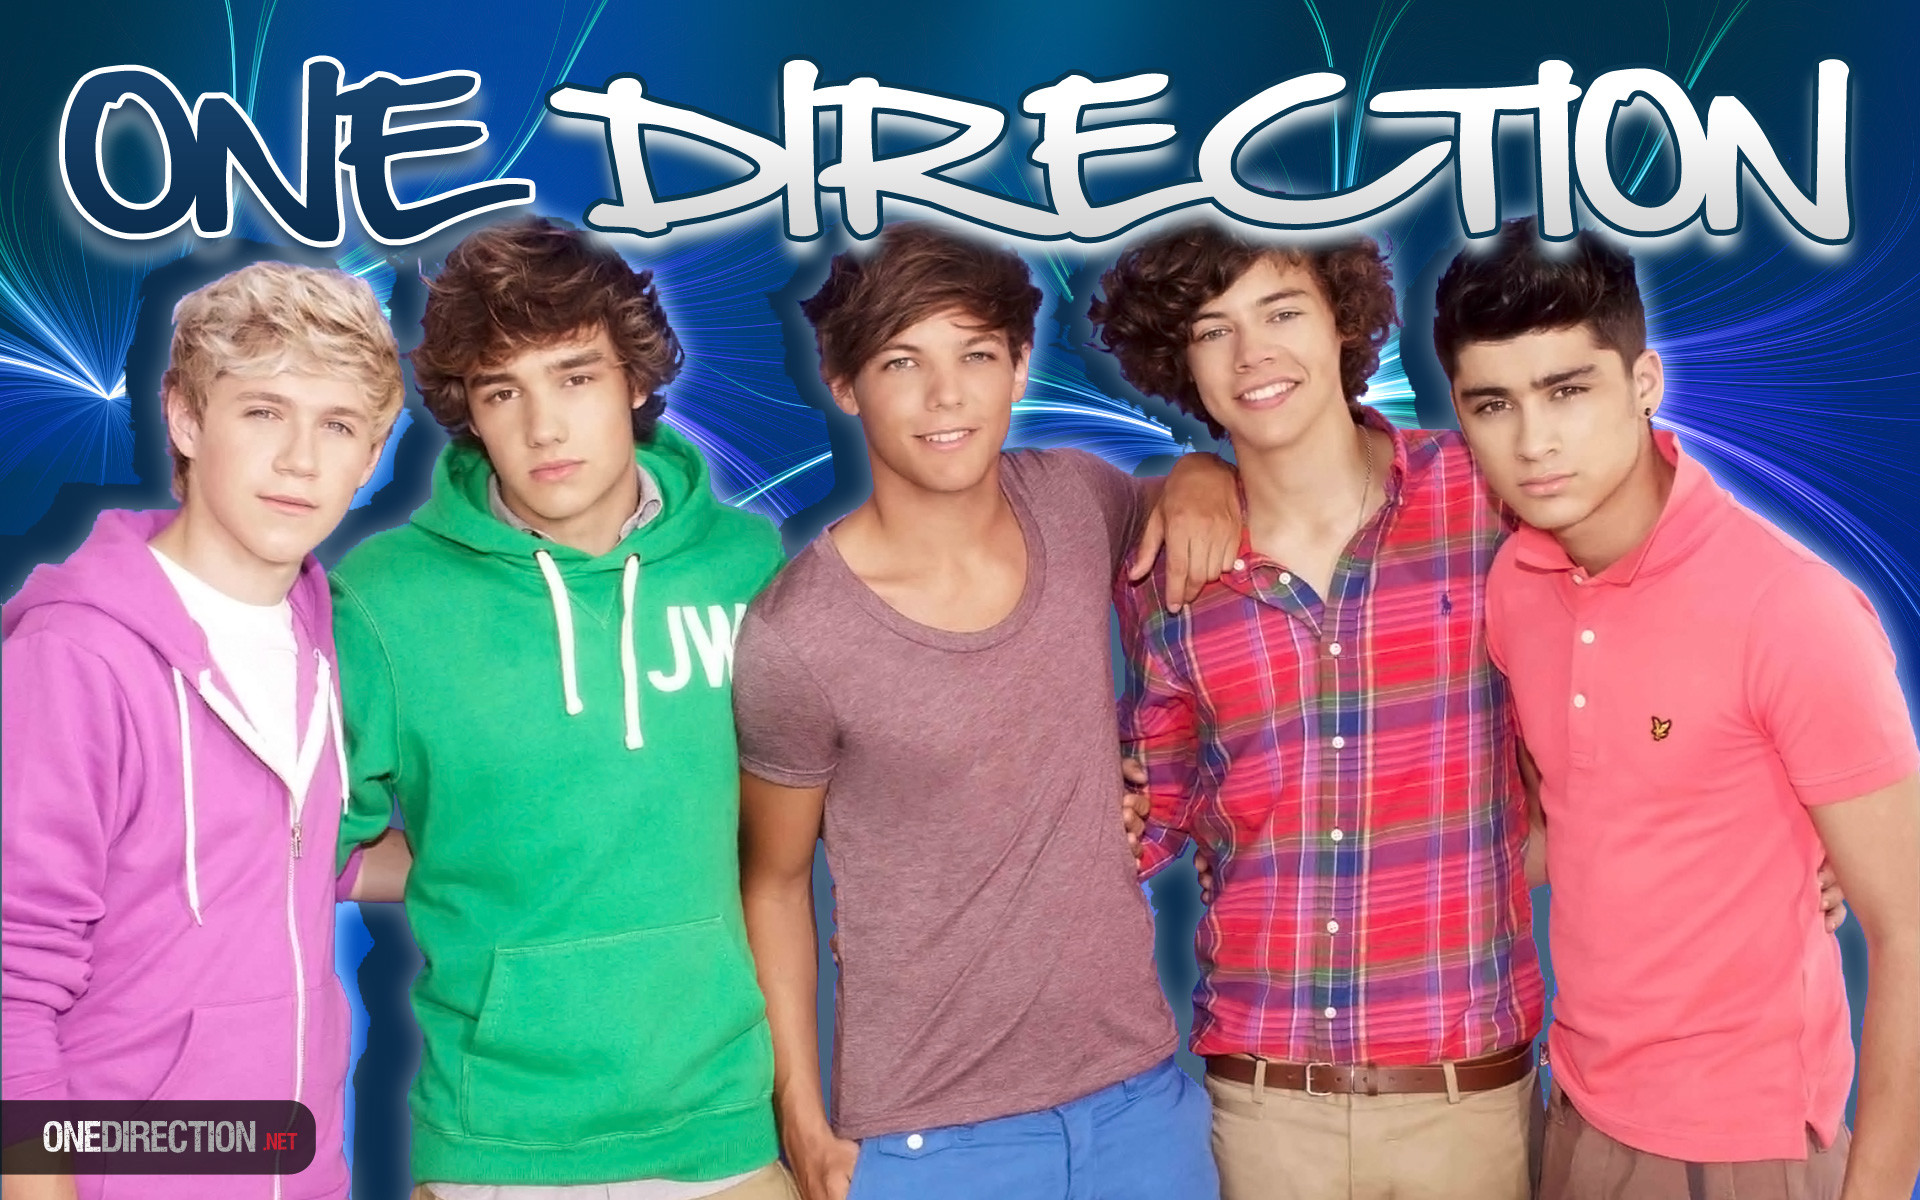 1920x1200 One Direction Wallpapers | PC, Mac, IPhone & Android